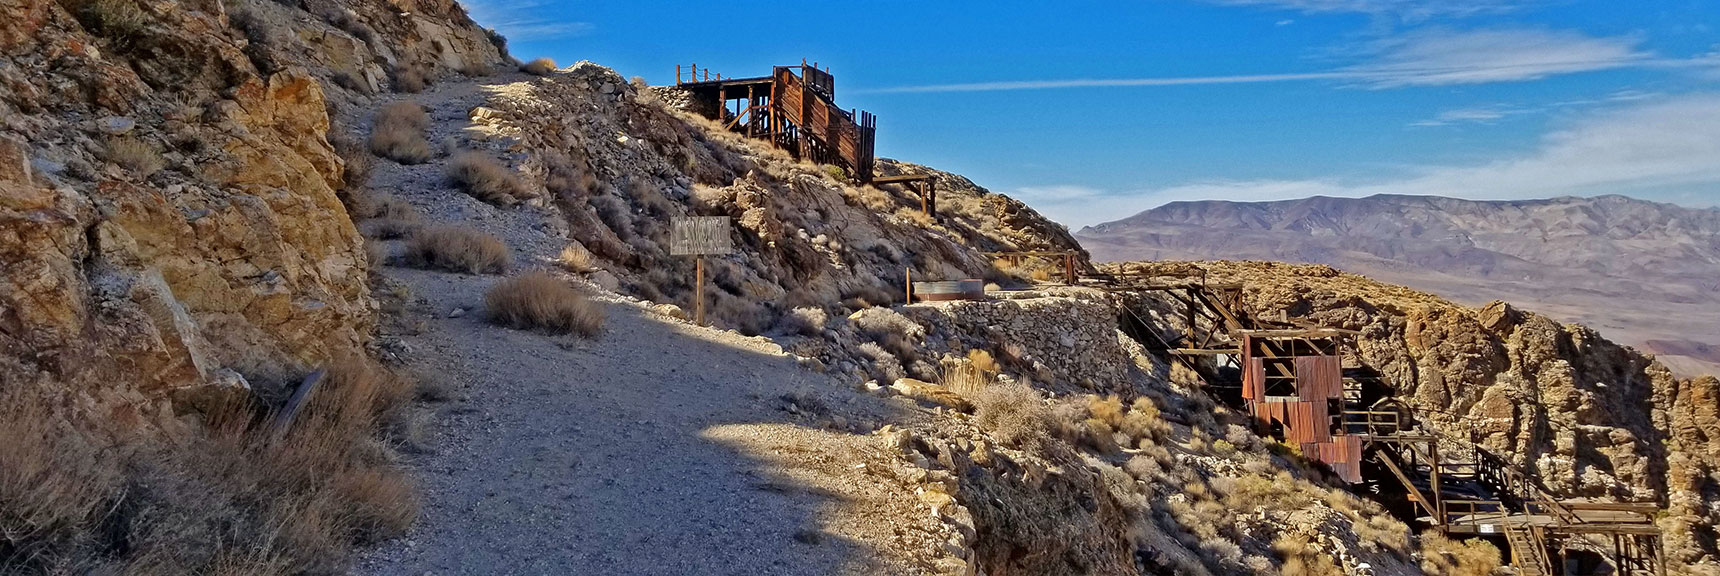 What's Left of the Skidoo Stamp Mill | Skidoo Stamp Mill, Panamint Mountains, Death Valley National Park, CA